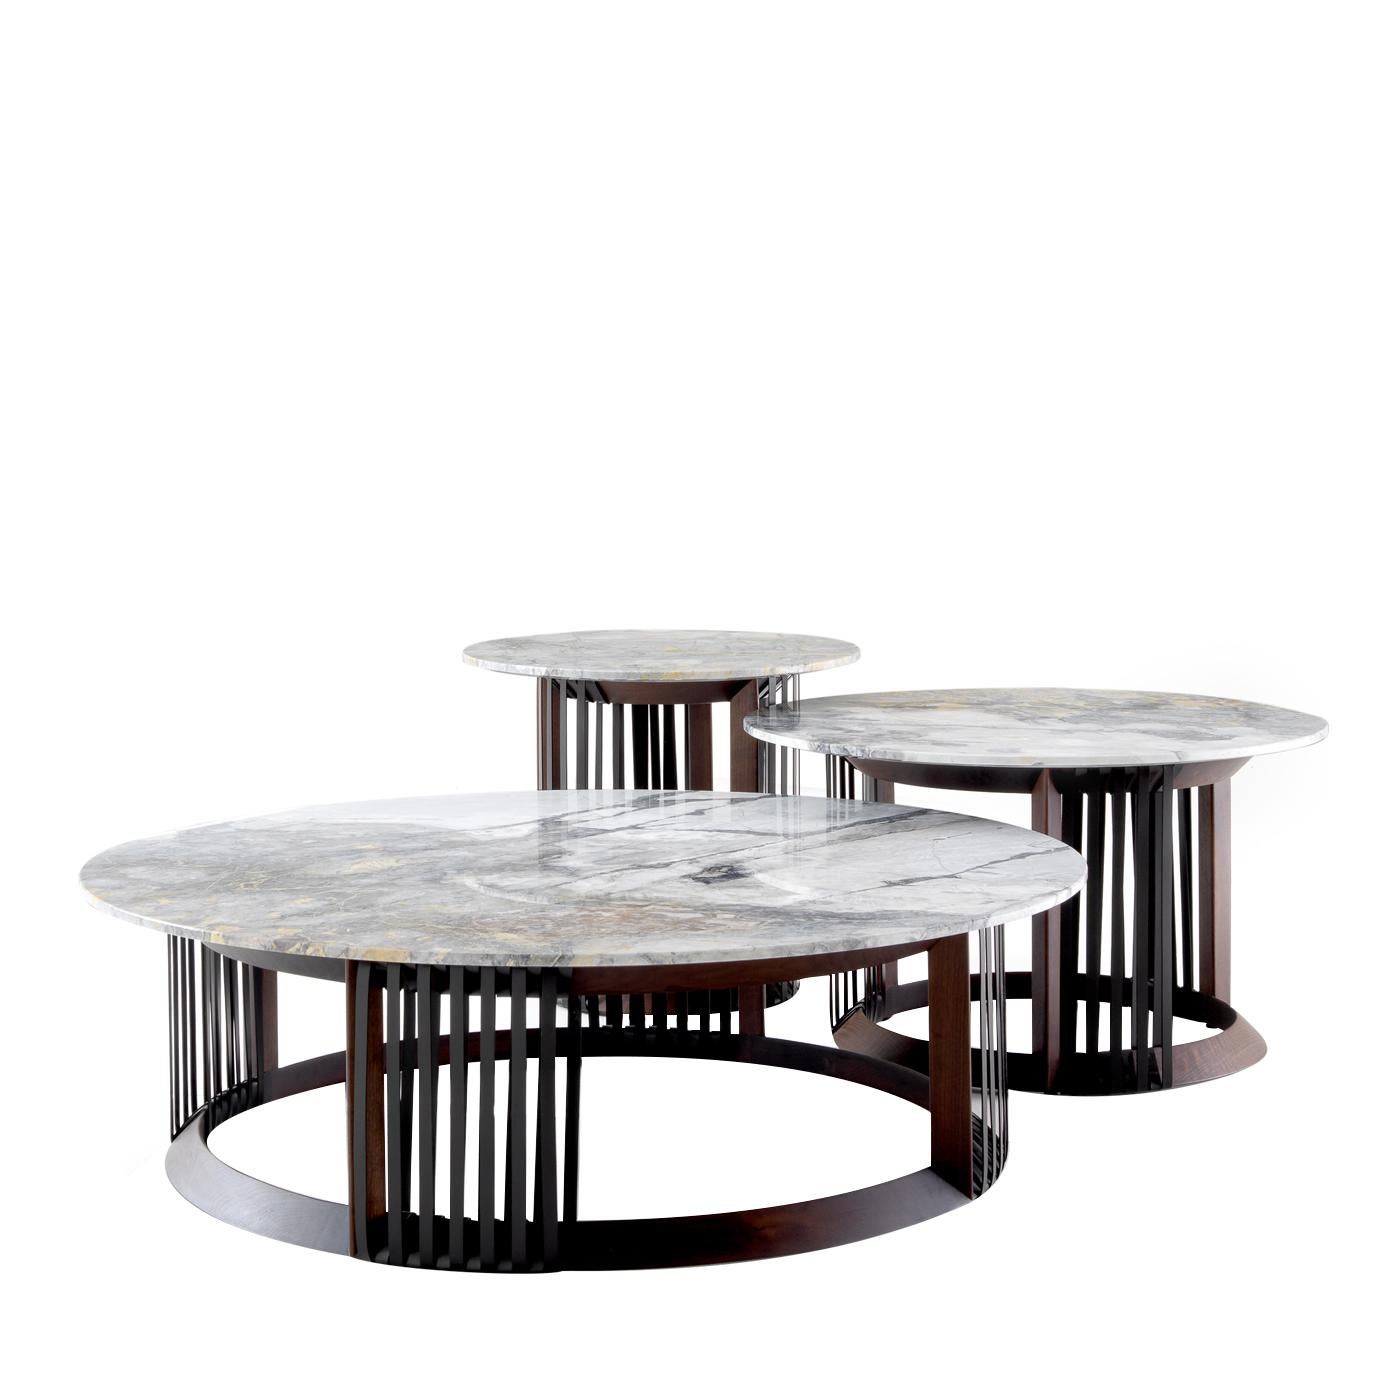 Italian Vincent Set of 3 Grey Marble Coffee Tables by Castello Lagravinese Studio